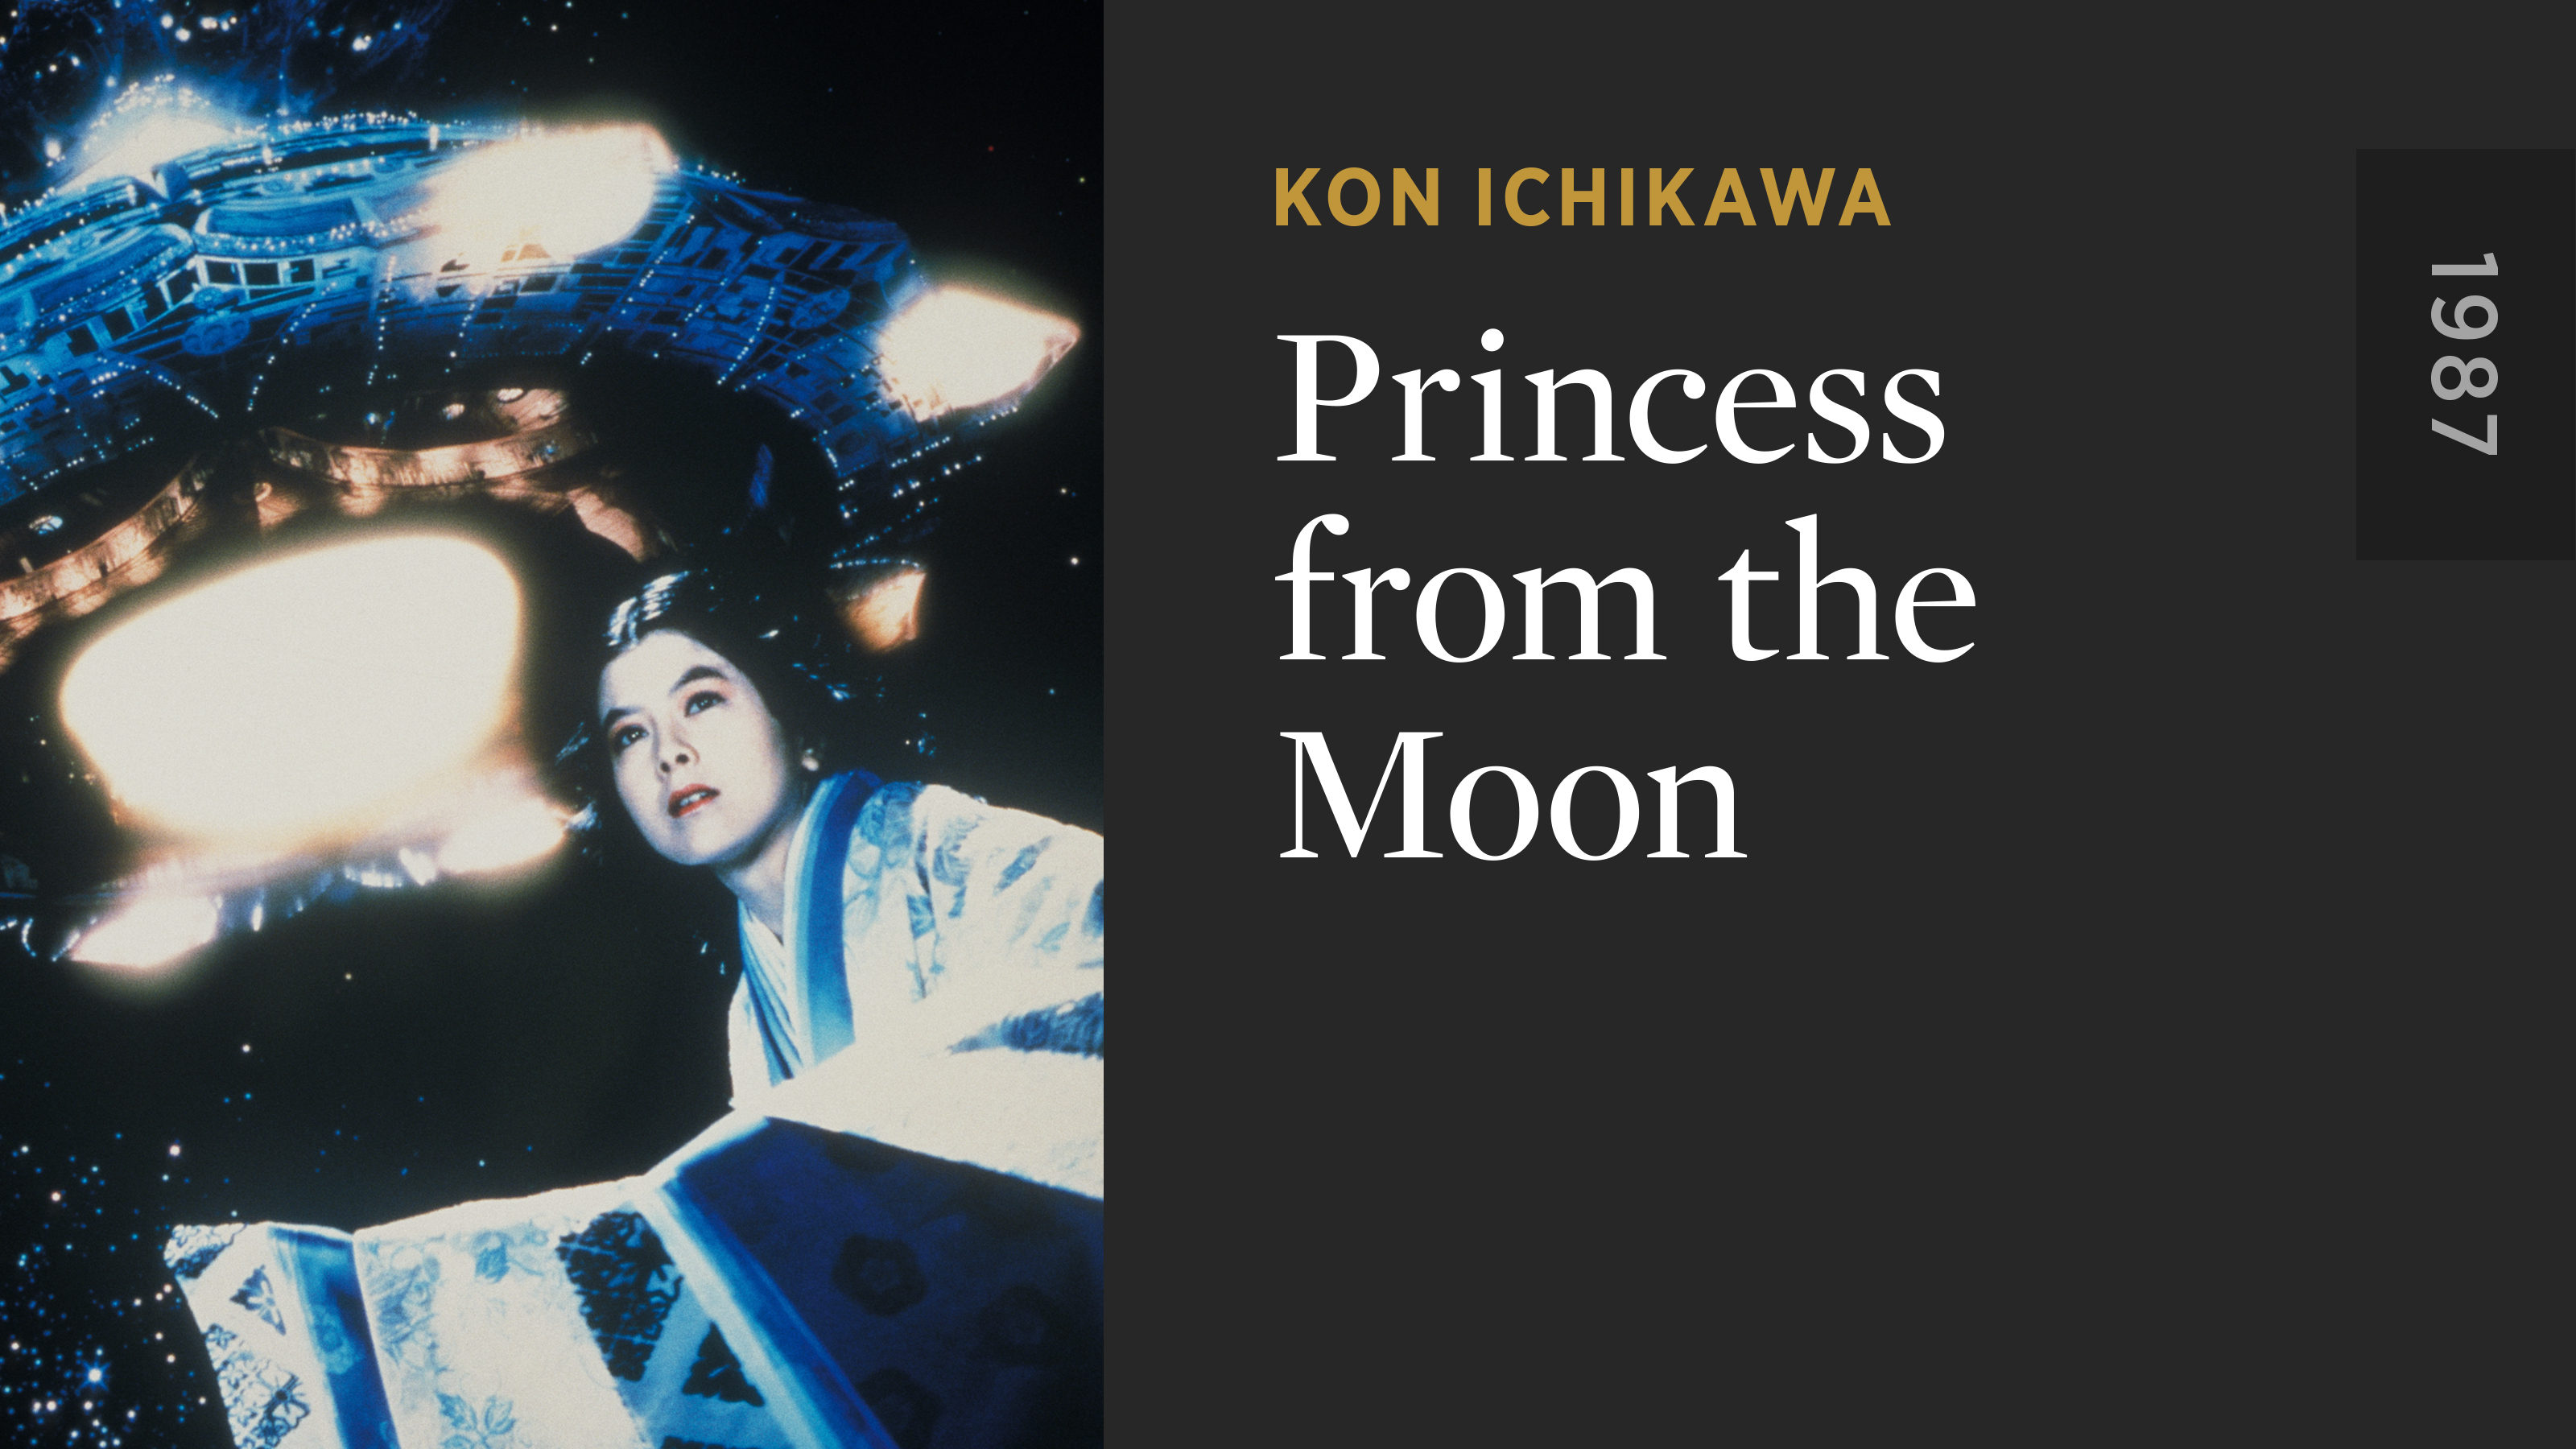 Princess from the Moon - The Criterion Channel